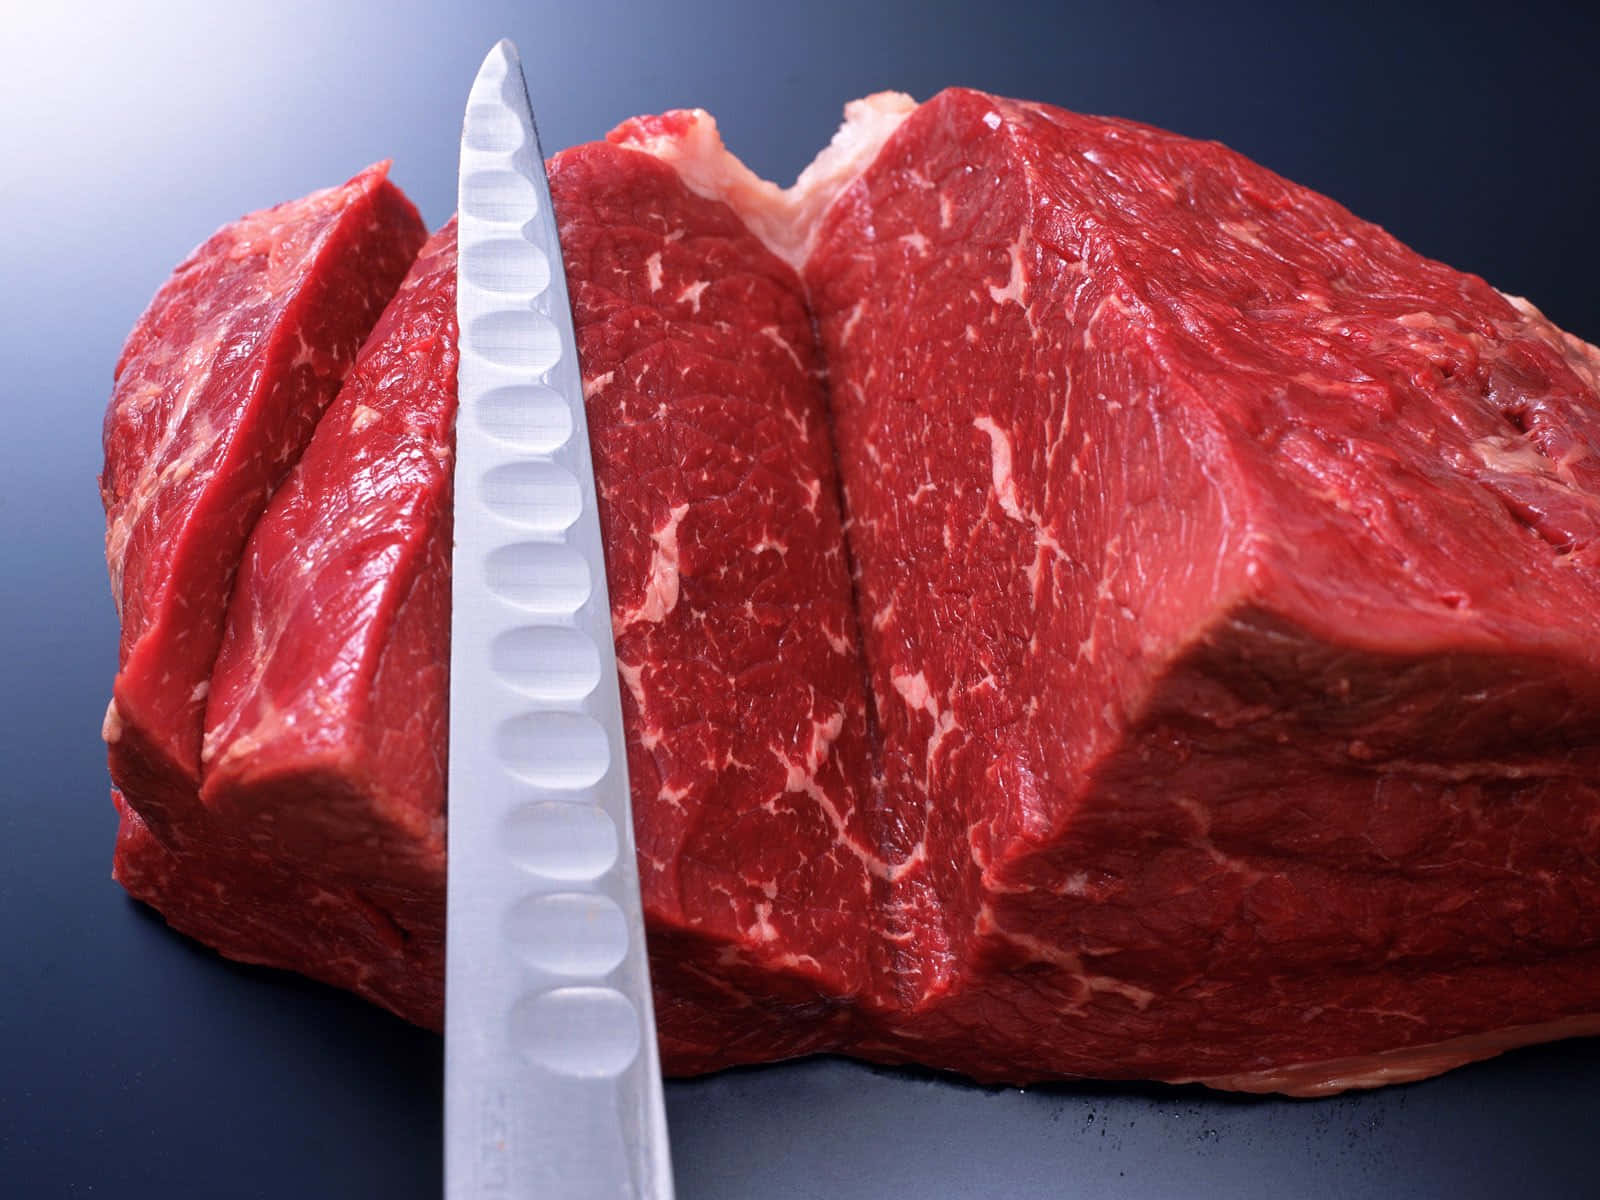 Juicy Red Meat in High Resolution Wallpaper